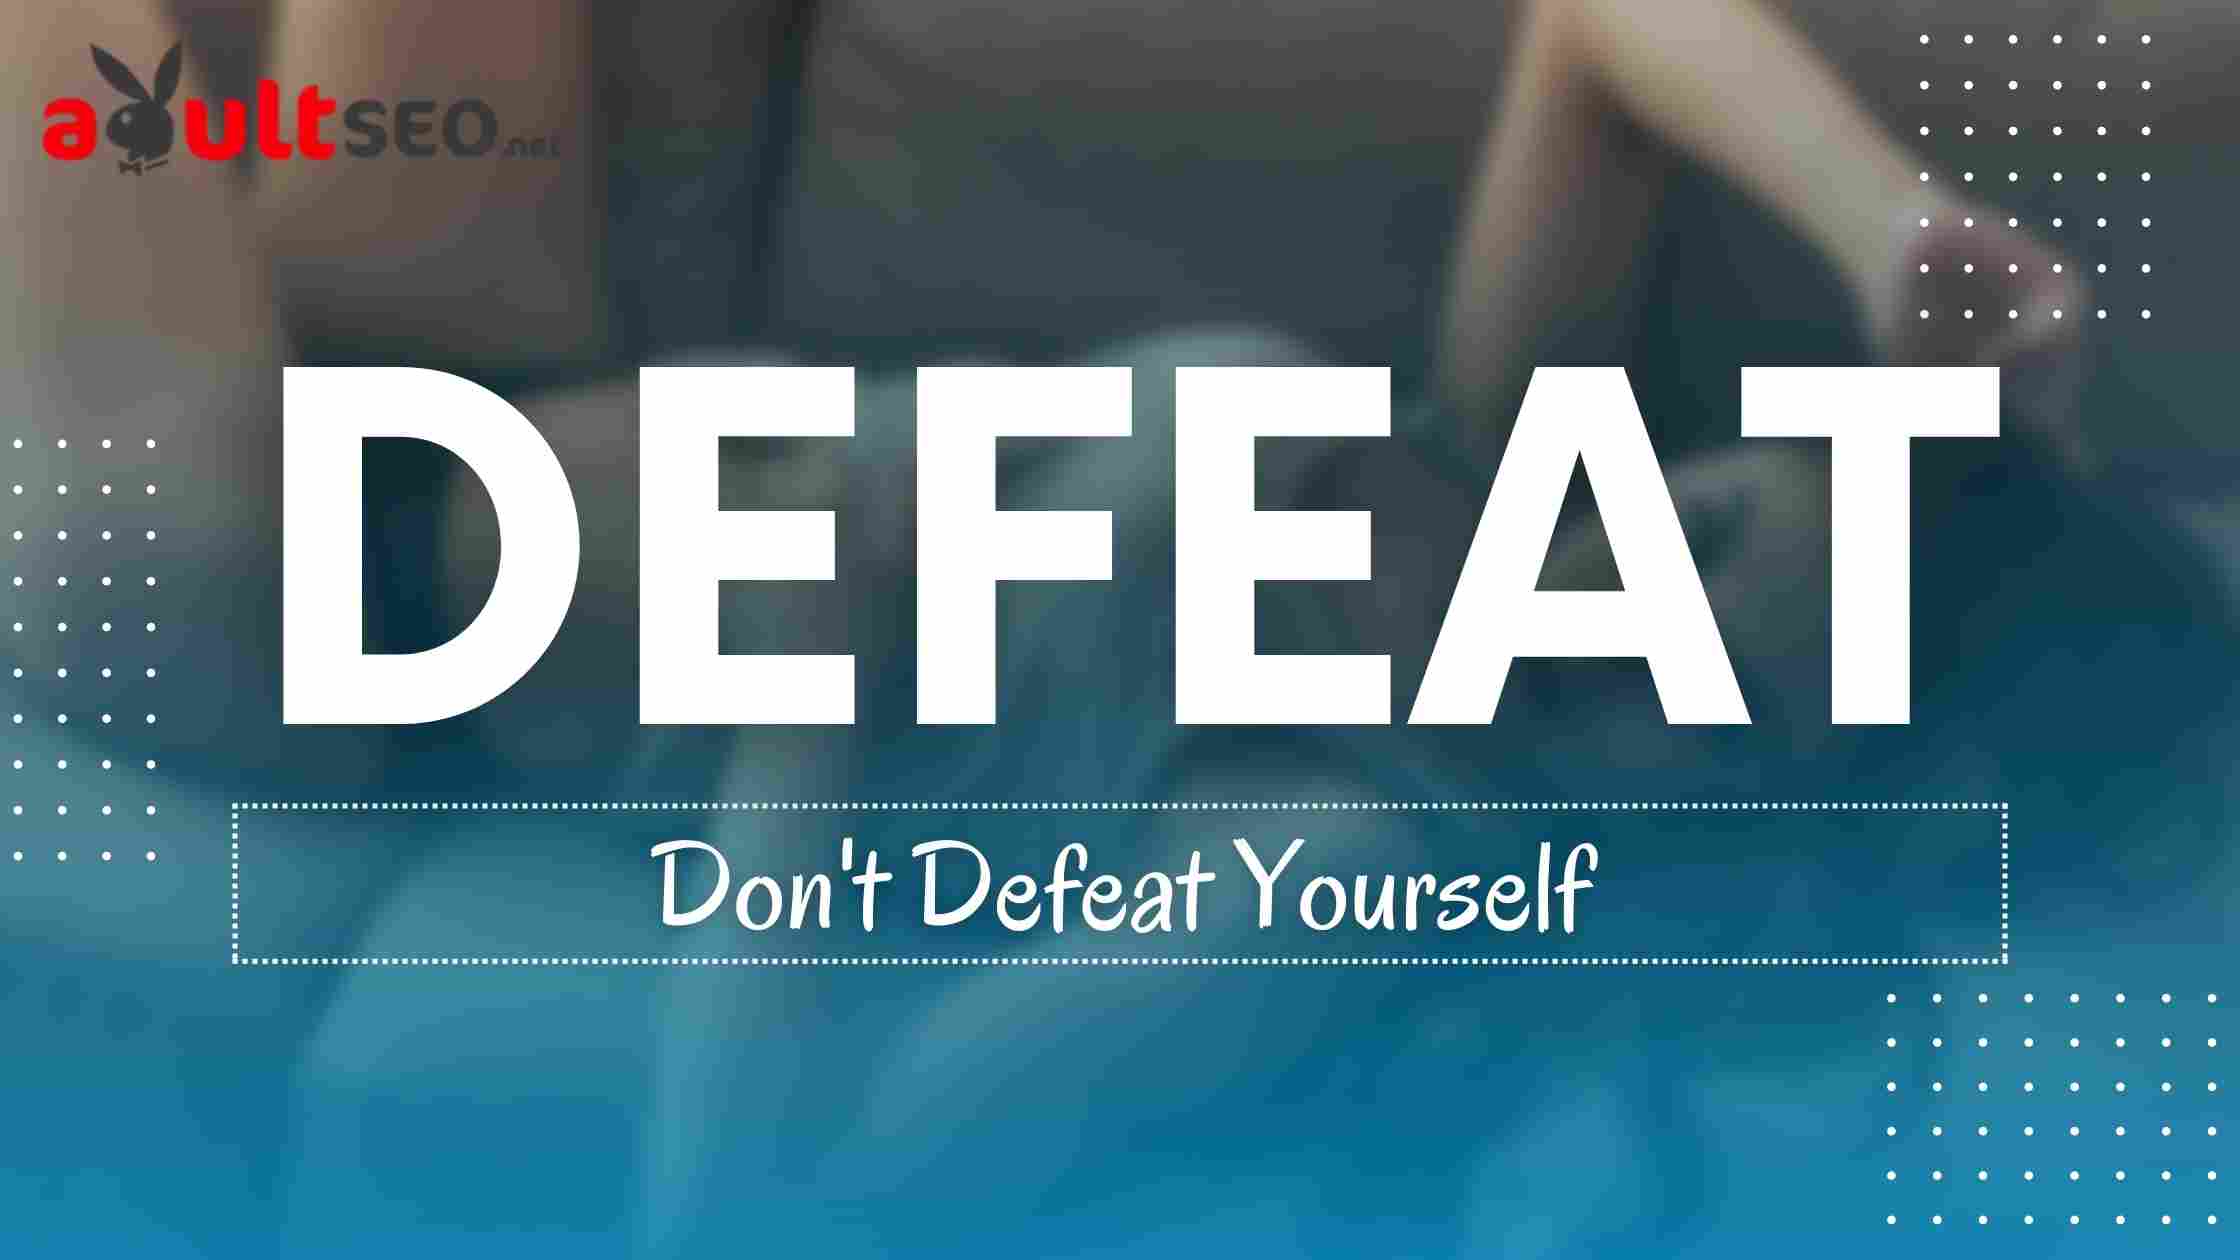 Don't defeat yourself